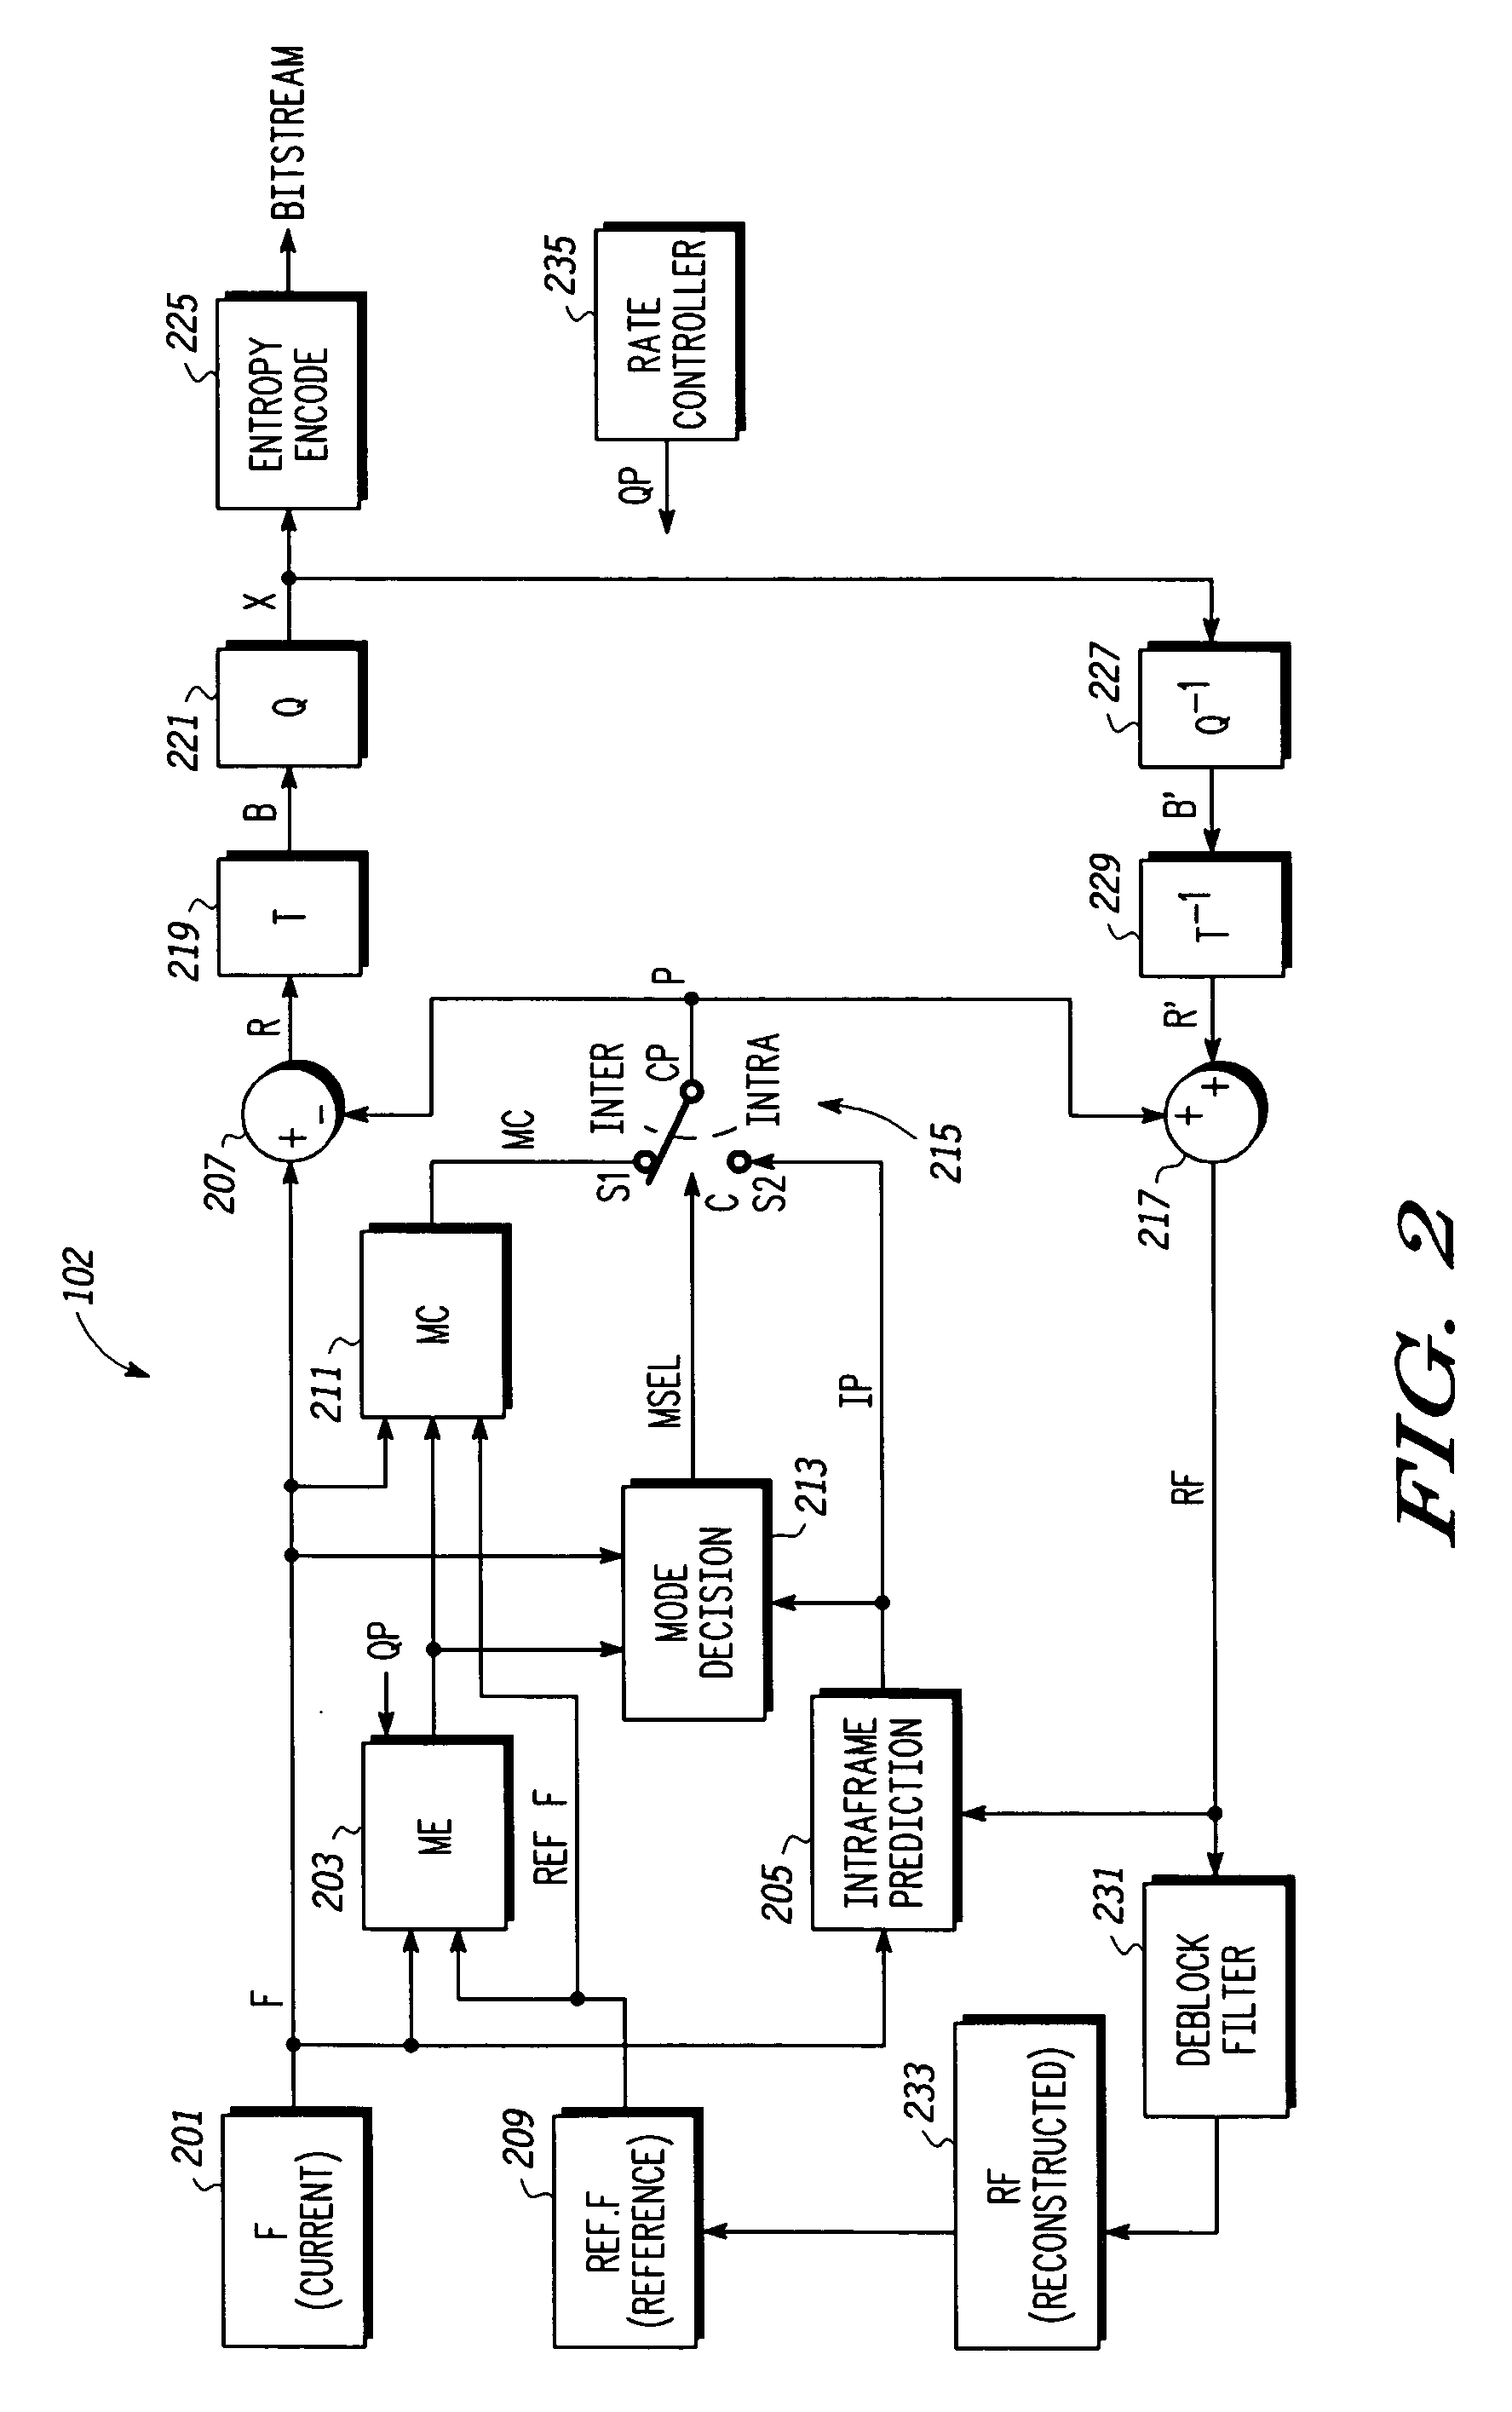 System and method for fast motion estimation